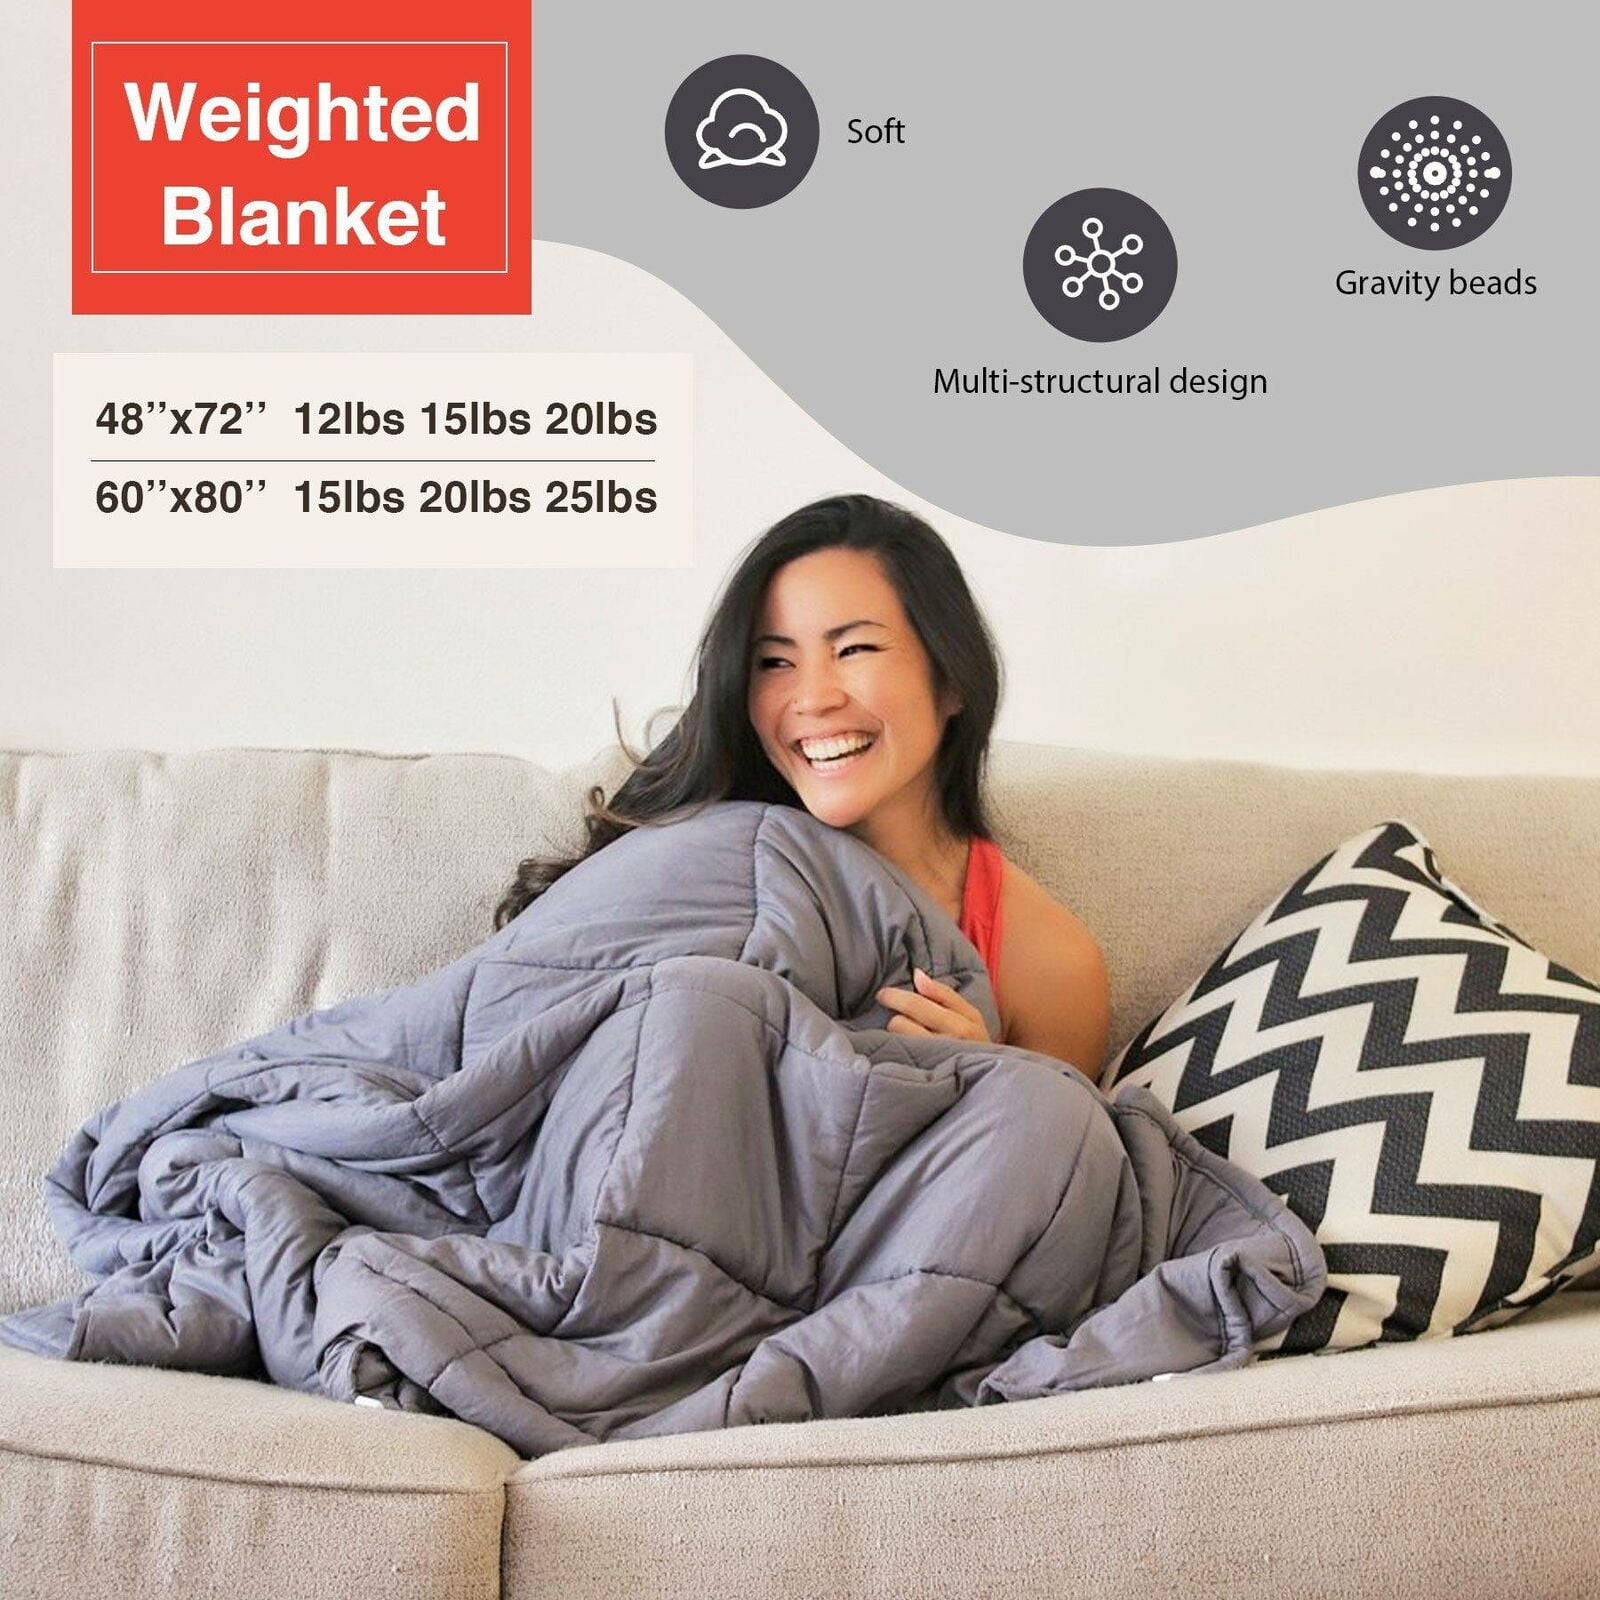 76"x80" King Size Weighted Blanket Reduce Anxiety Stress Better Deep Sleep 15lbs 